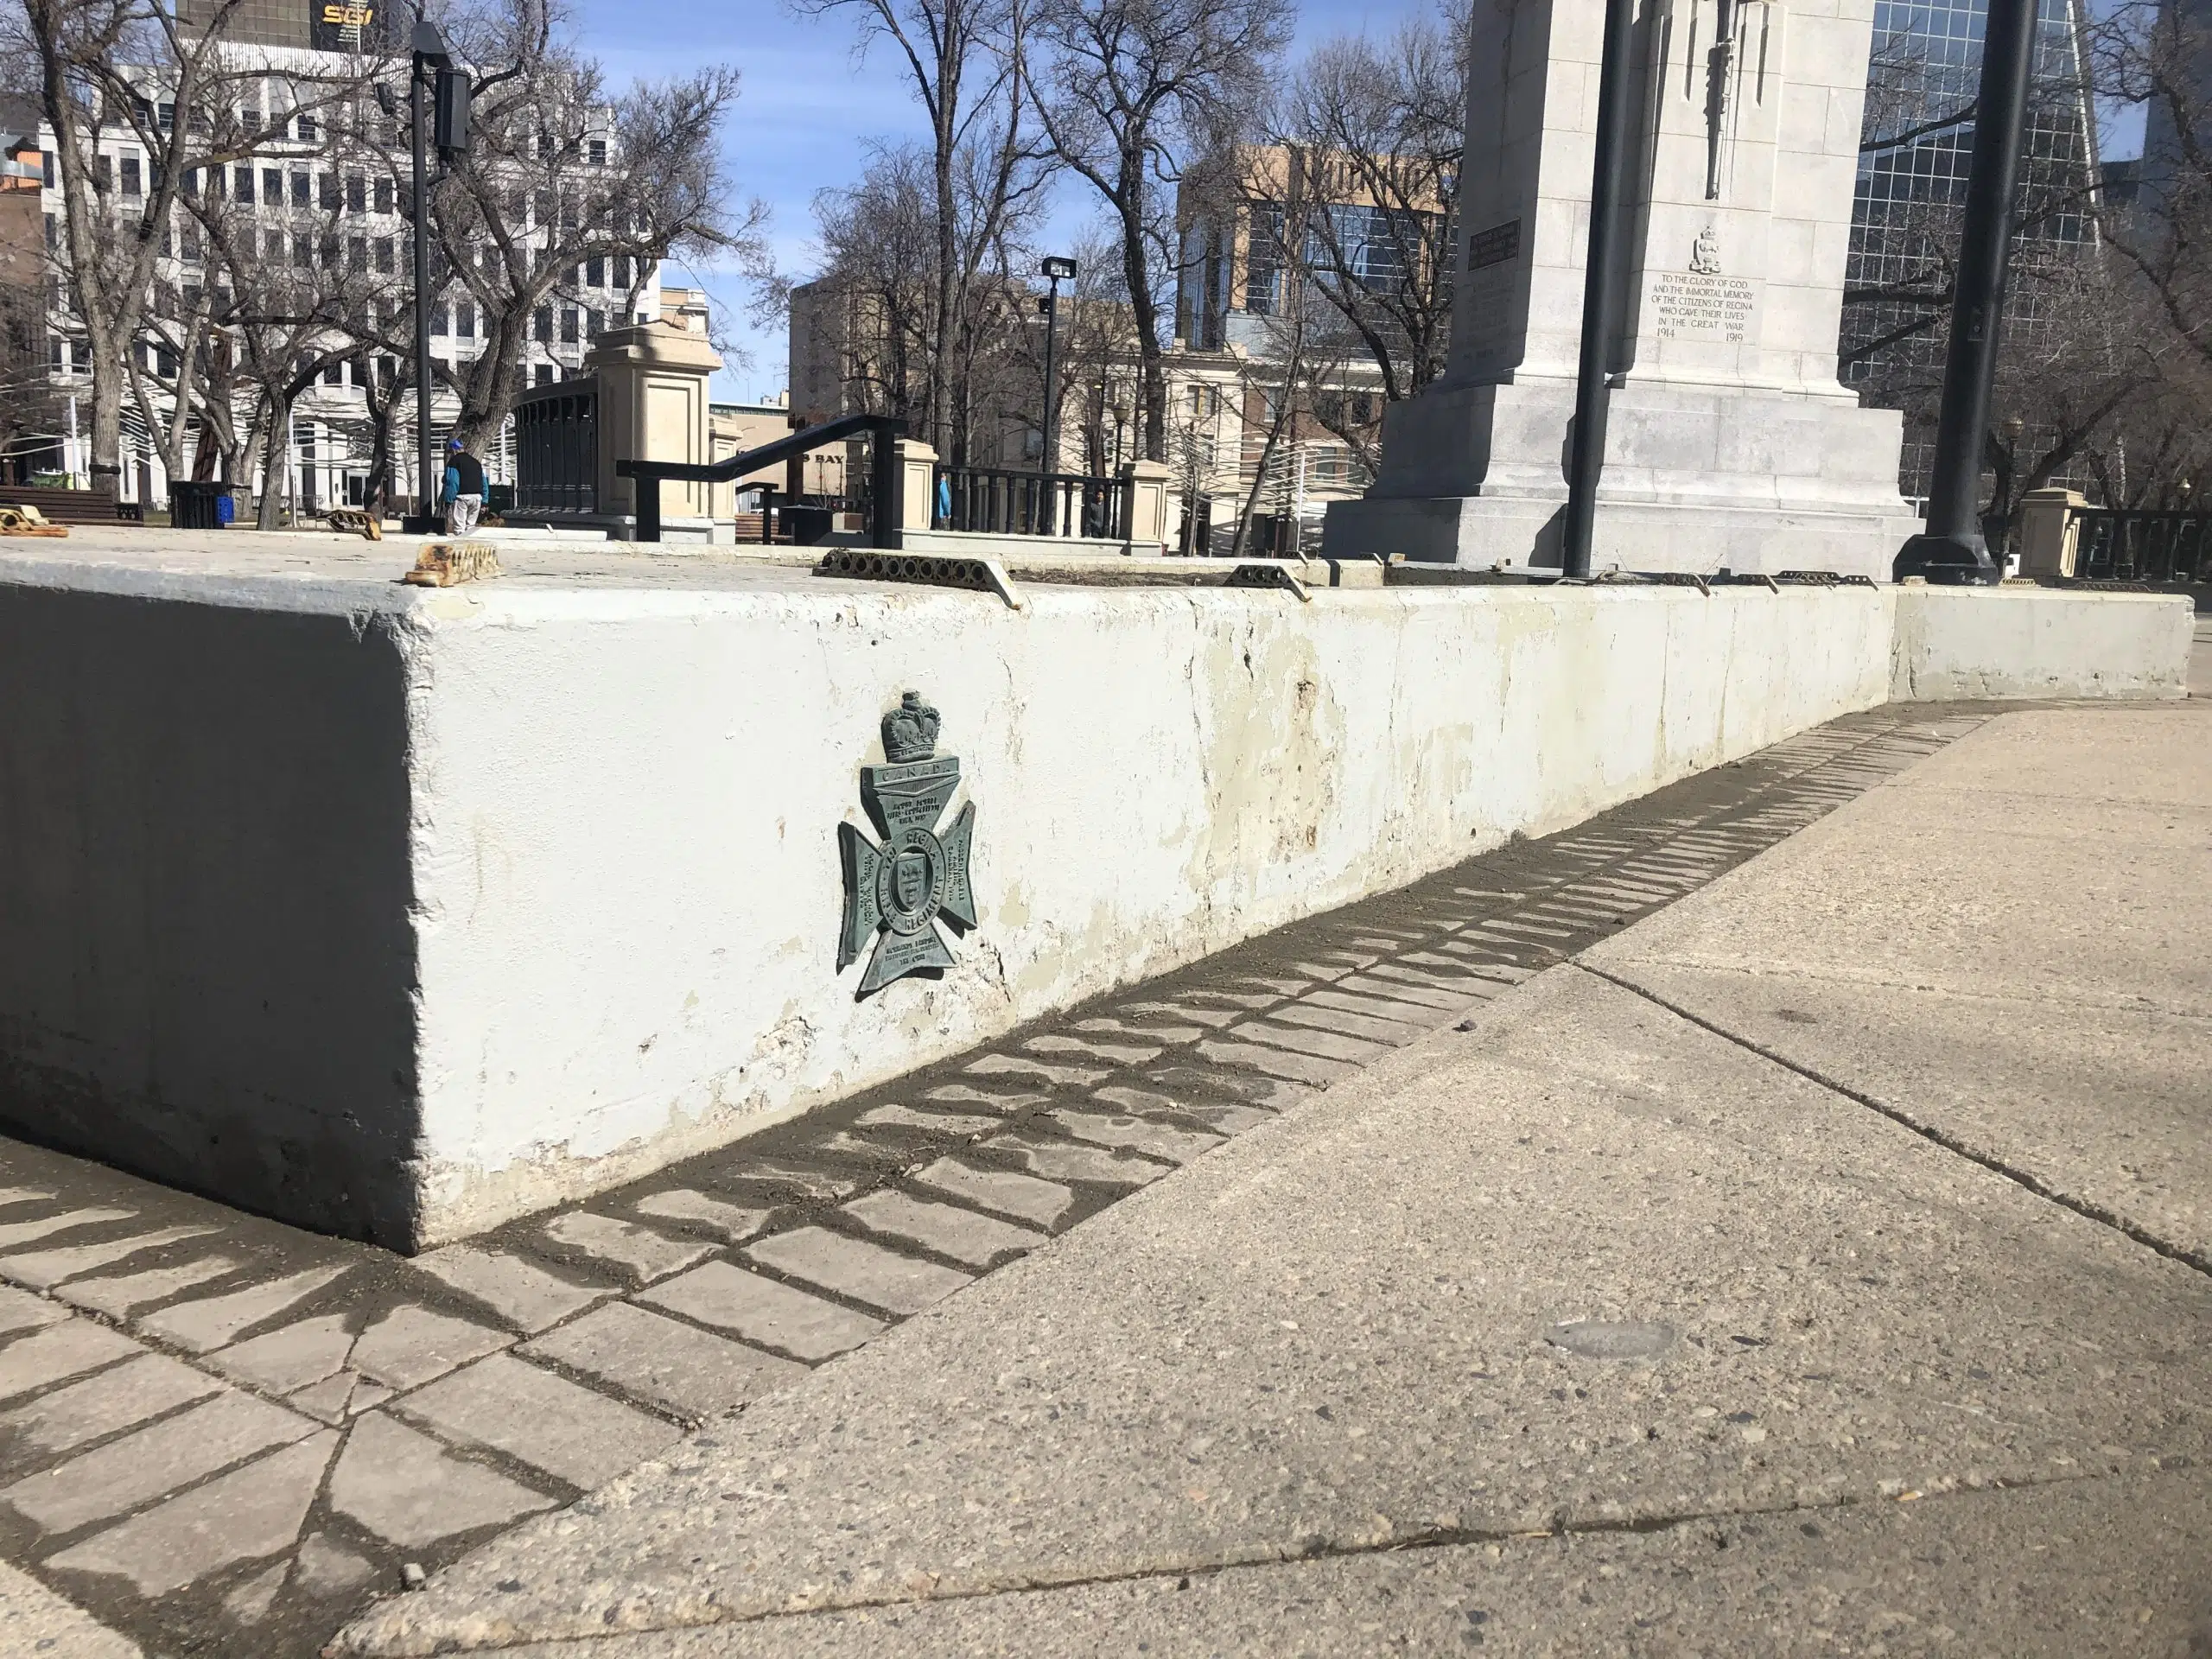 Legion disturbed over disappearance of cenotaph plaque